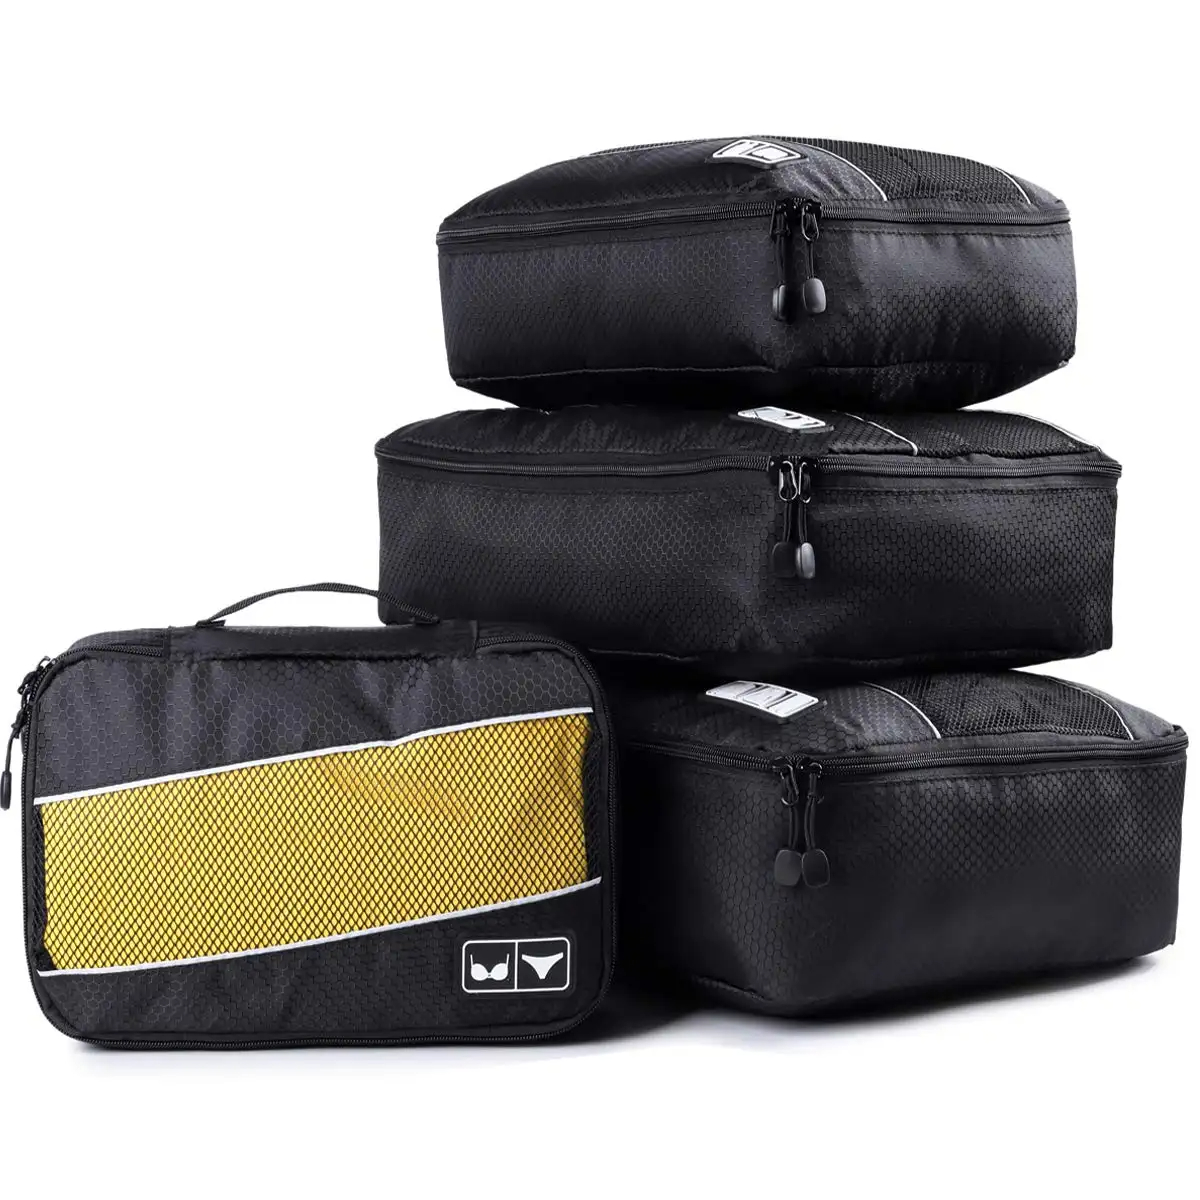 WellPromotion Packing Cubes